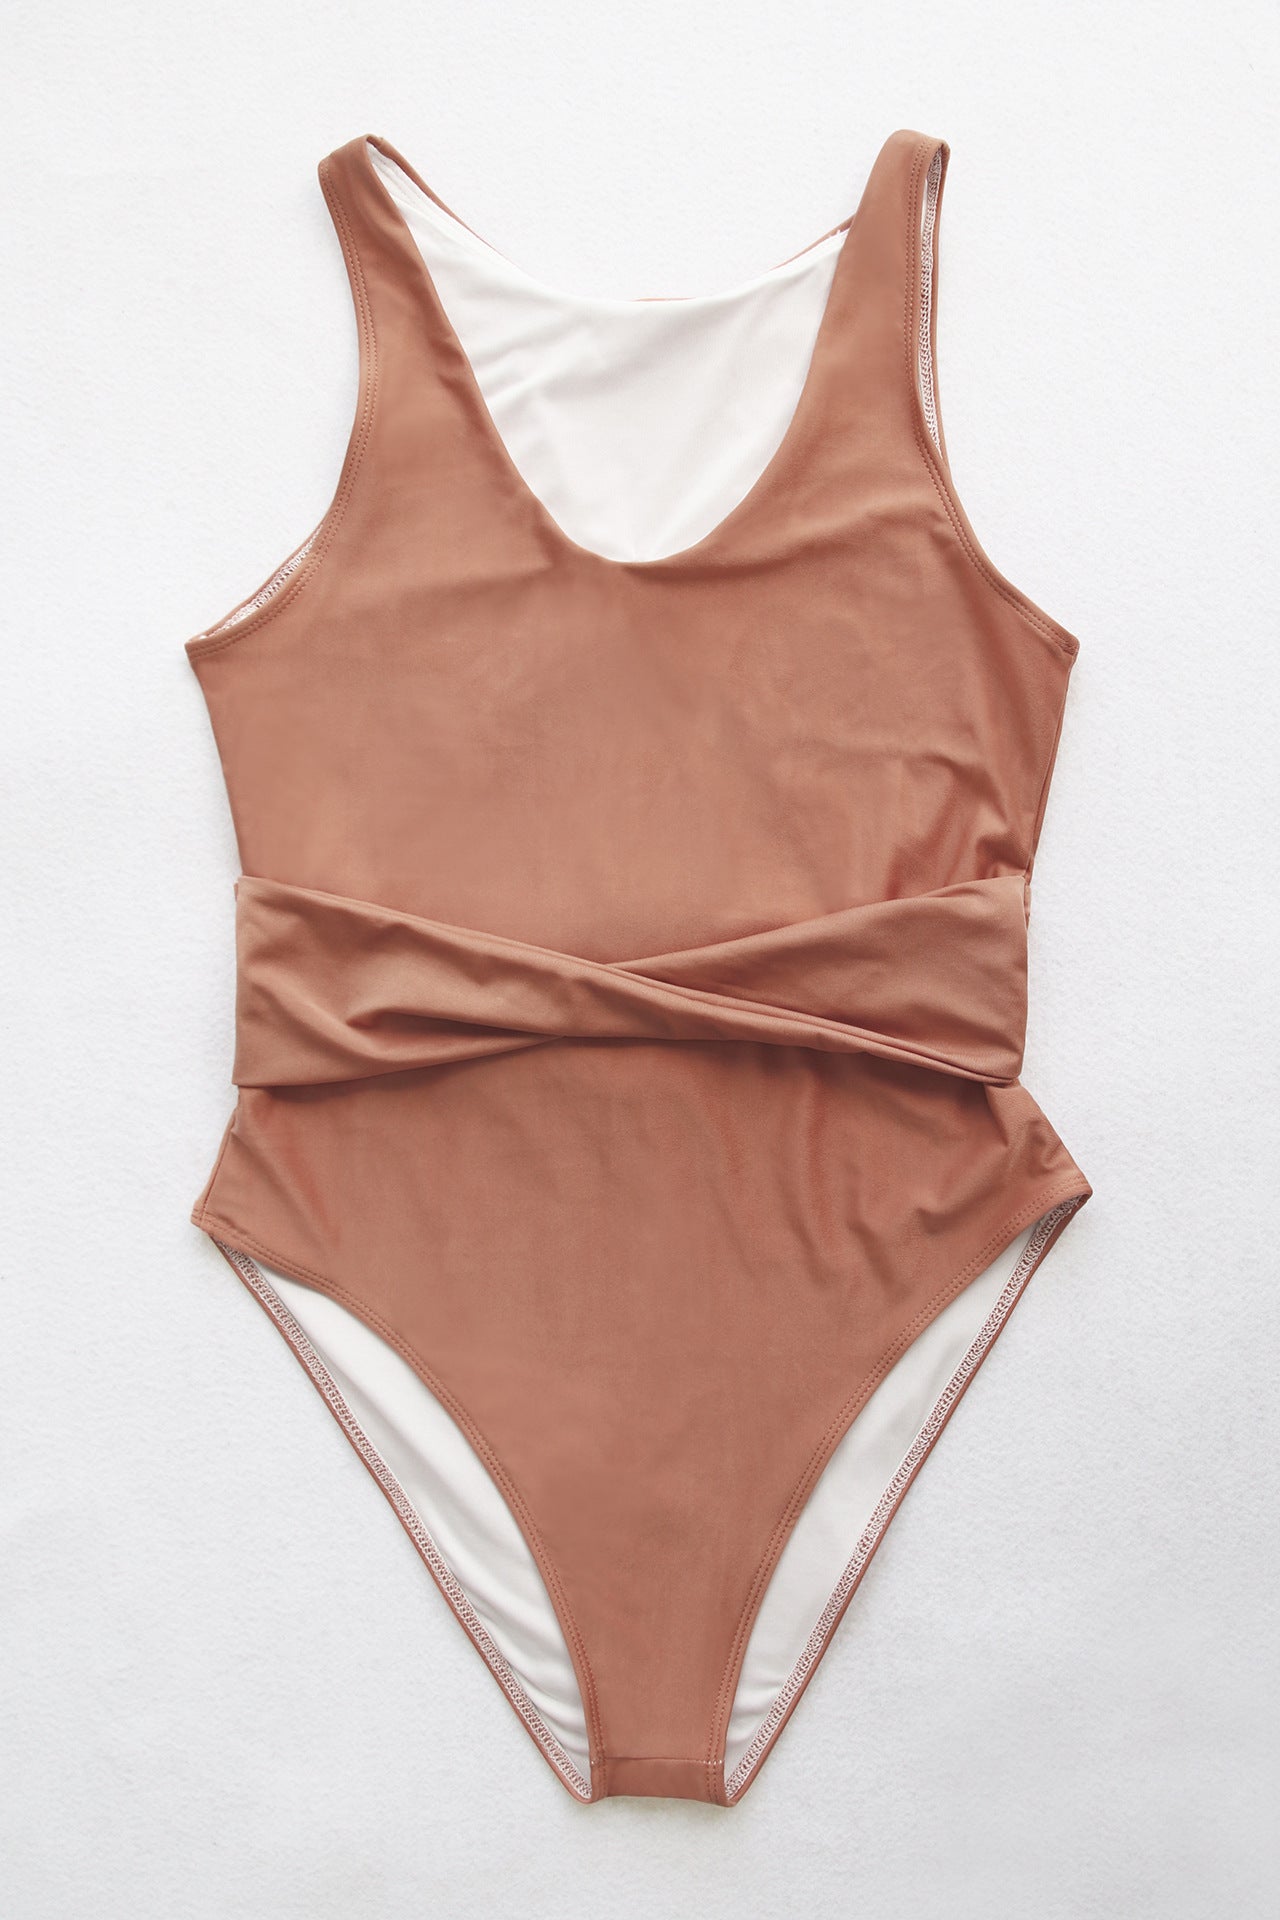 THE BAY in the nude one-piece – Lamoille Yoga